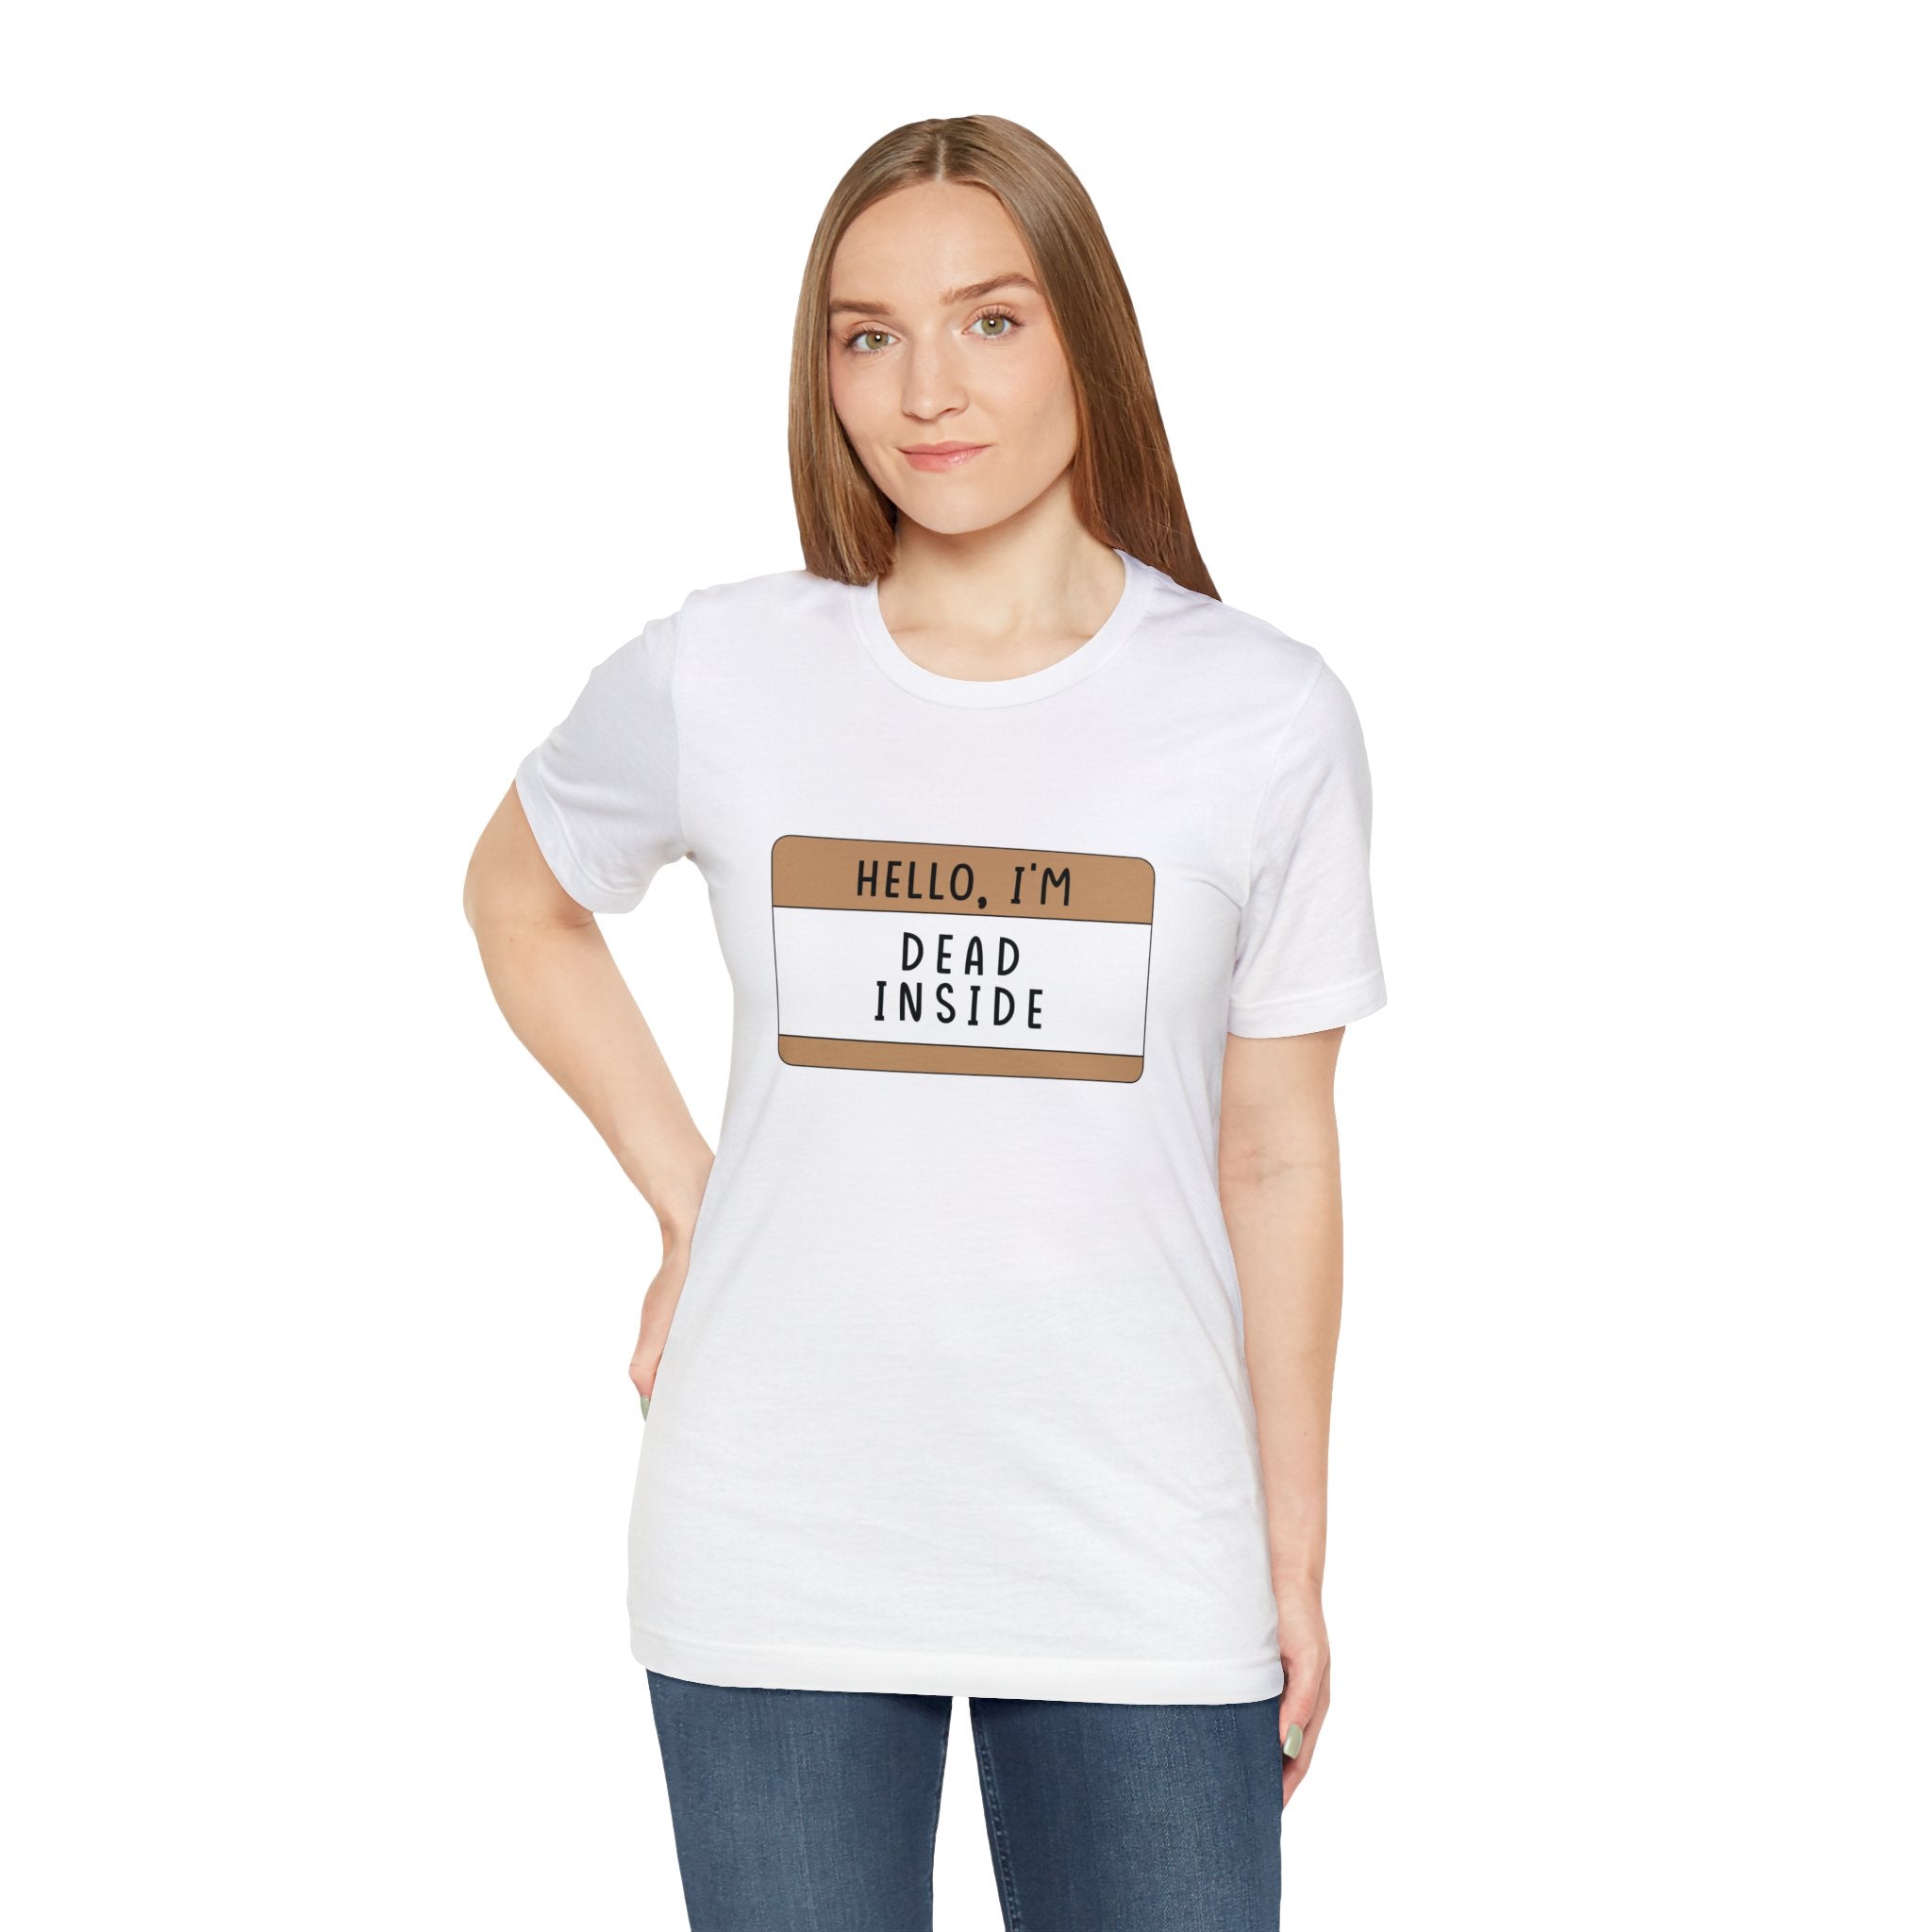 A woman in a white Hello, I'm Dead Inside T-Shirt with a quirky design that reads "hello, i'm dead inside," standing against a plain background.